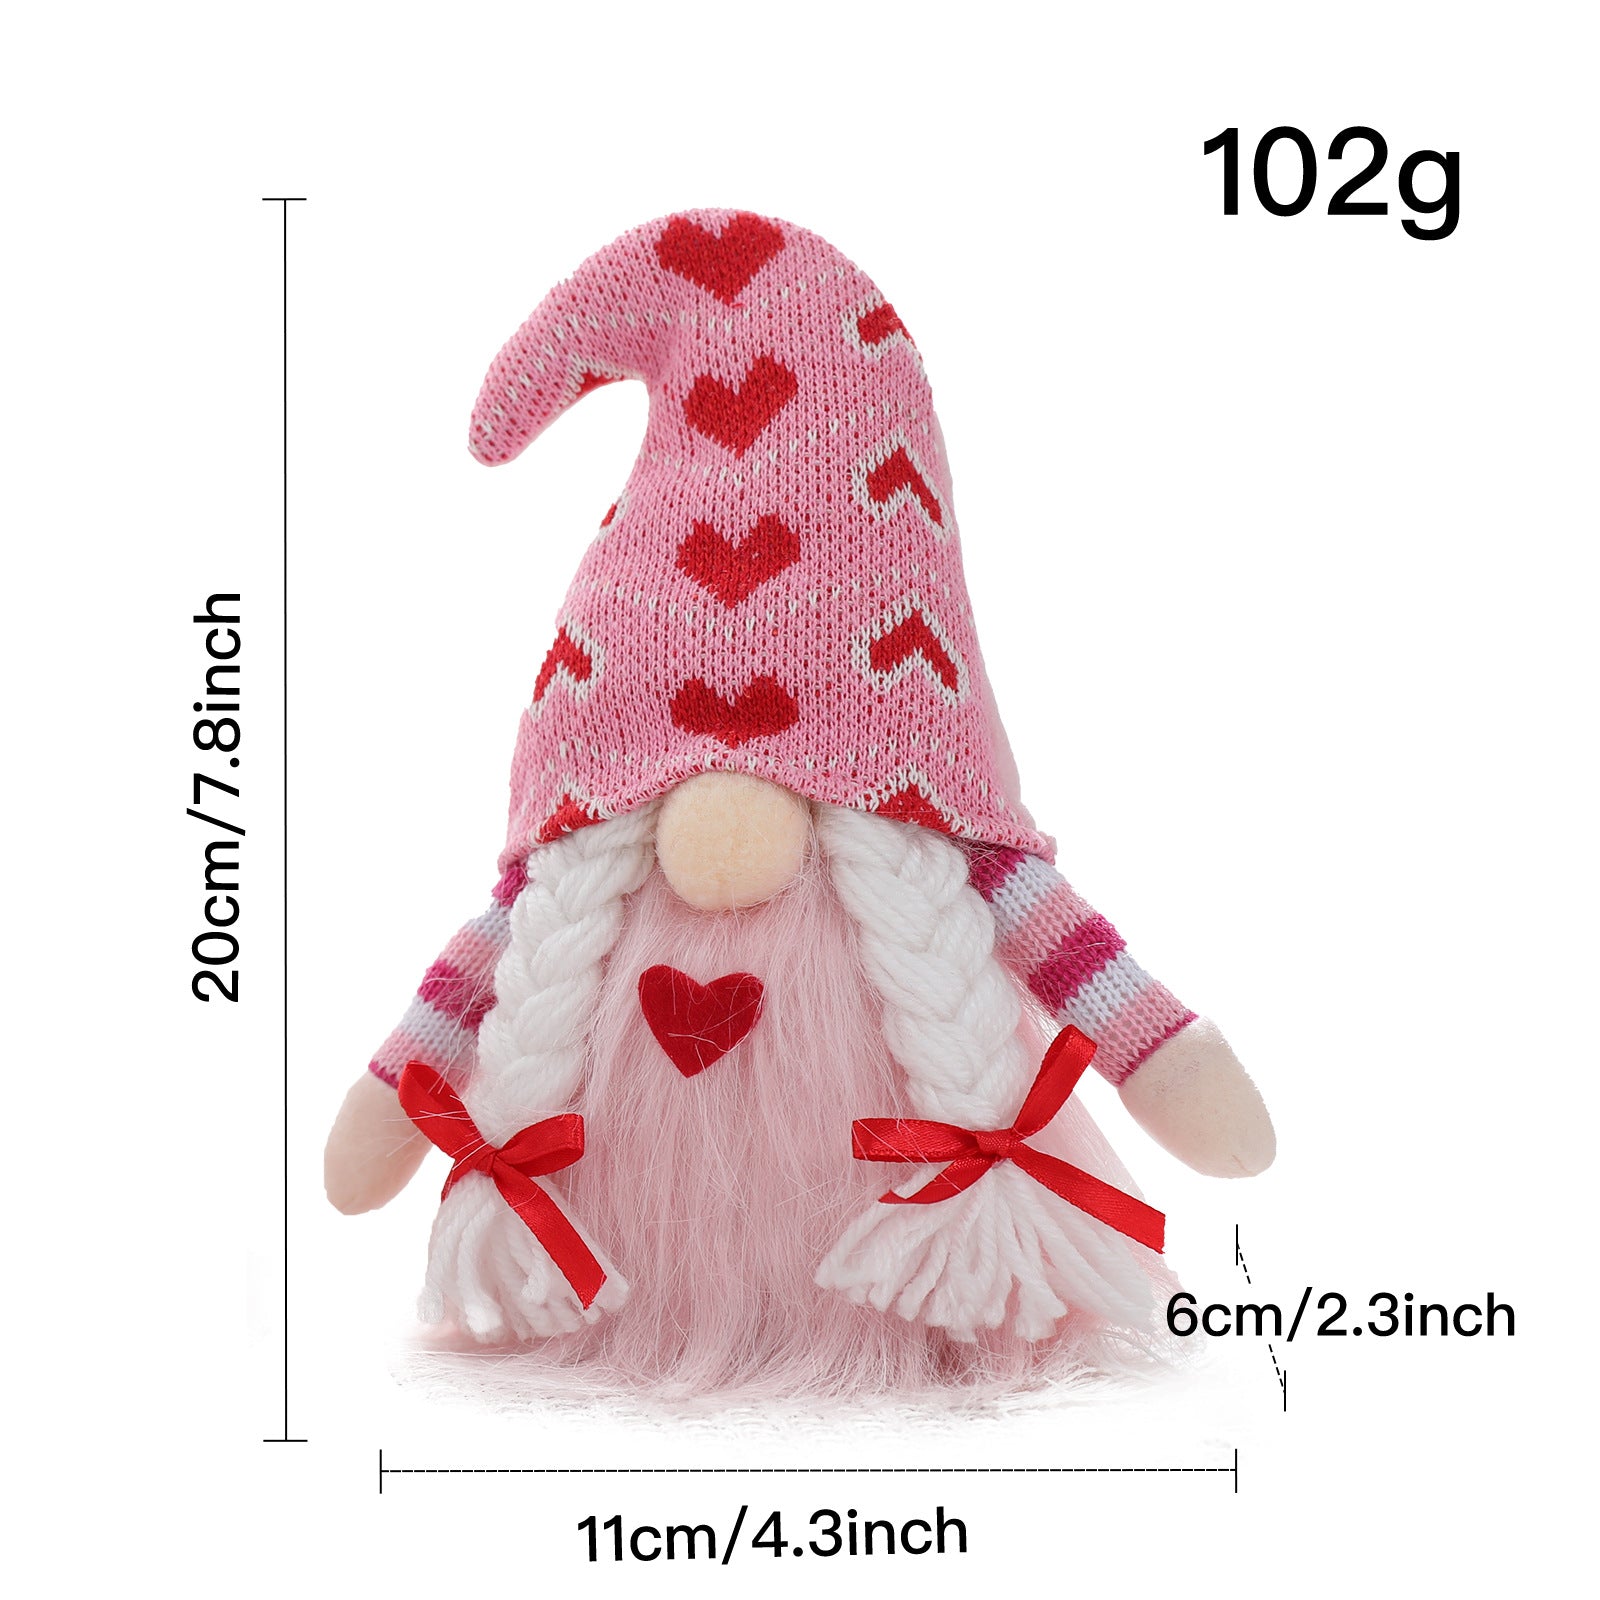 Valentine's Day Gnome, Valentine's Day Gnomes Decor, Valentine's Day Gnomes DIY, Valentine's Day Gnome Craft, Valentine's Day Gnome Plush, Valentine's Day Gnomes, Valentine's Day Gnomes Aldi, Valentine Gnome Images, 